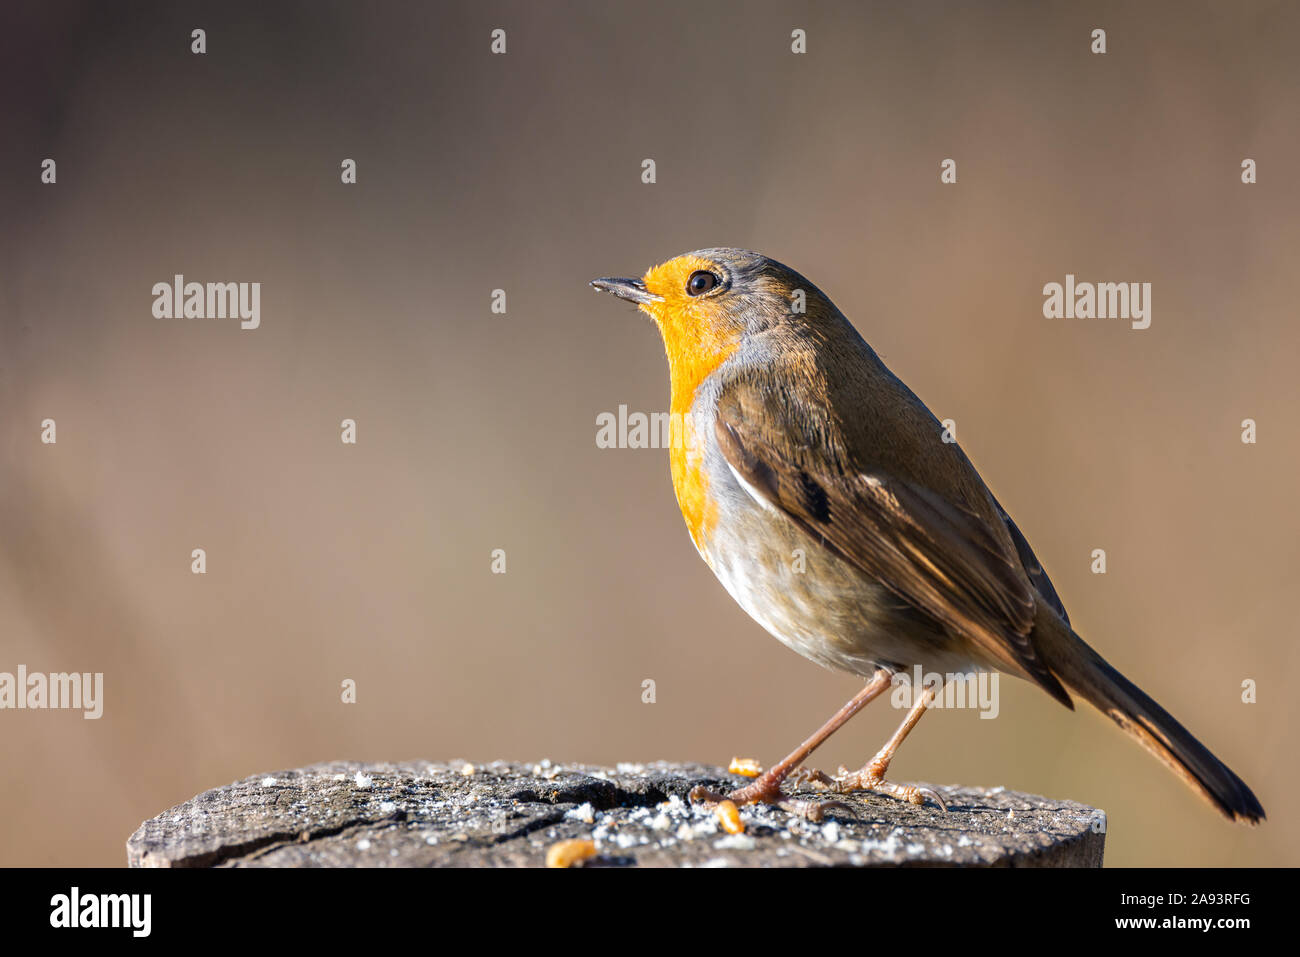 Erithacus rubecula or petirrojo europeo with copy space for text Stock Photo